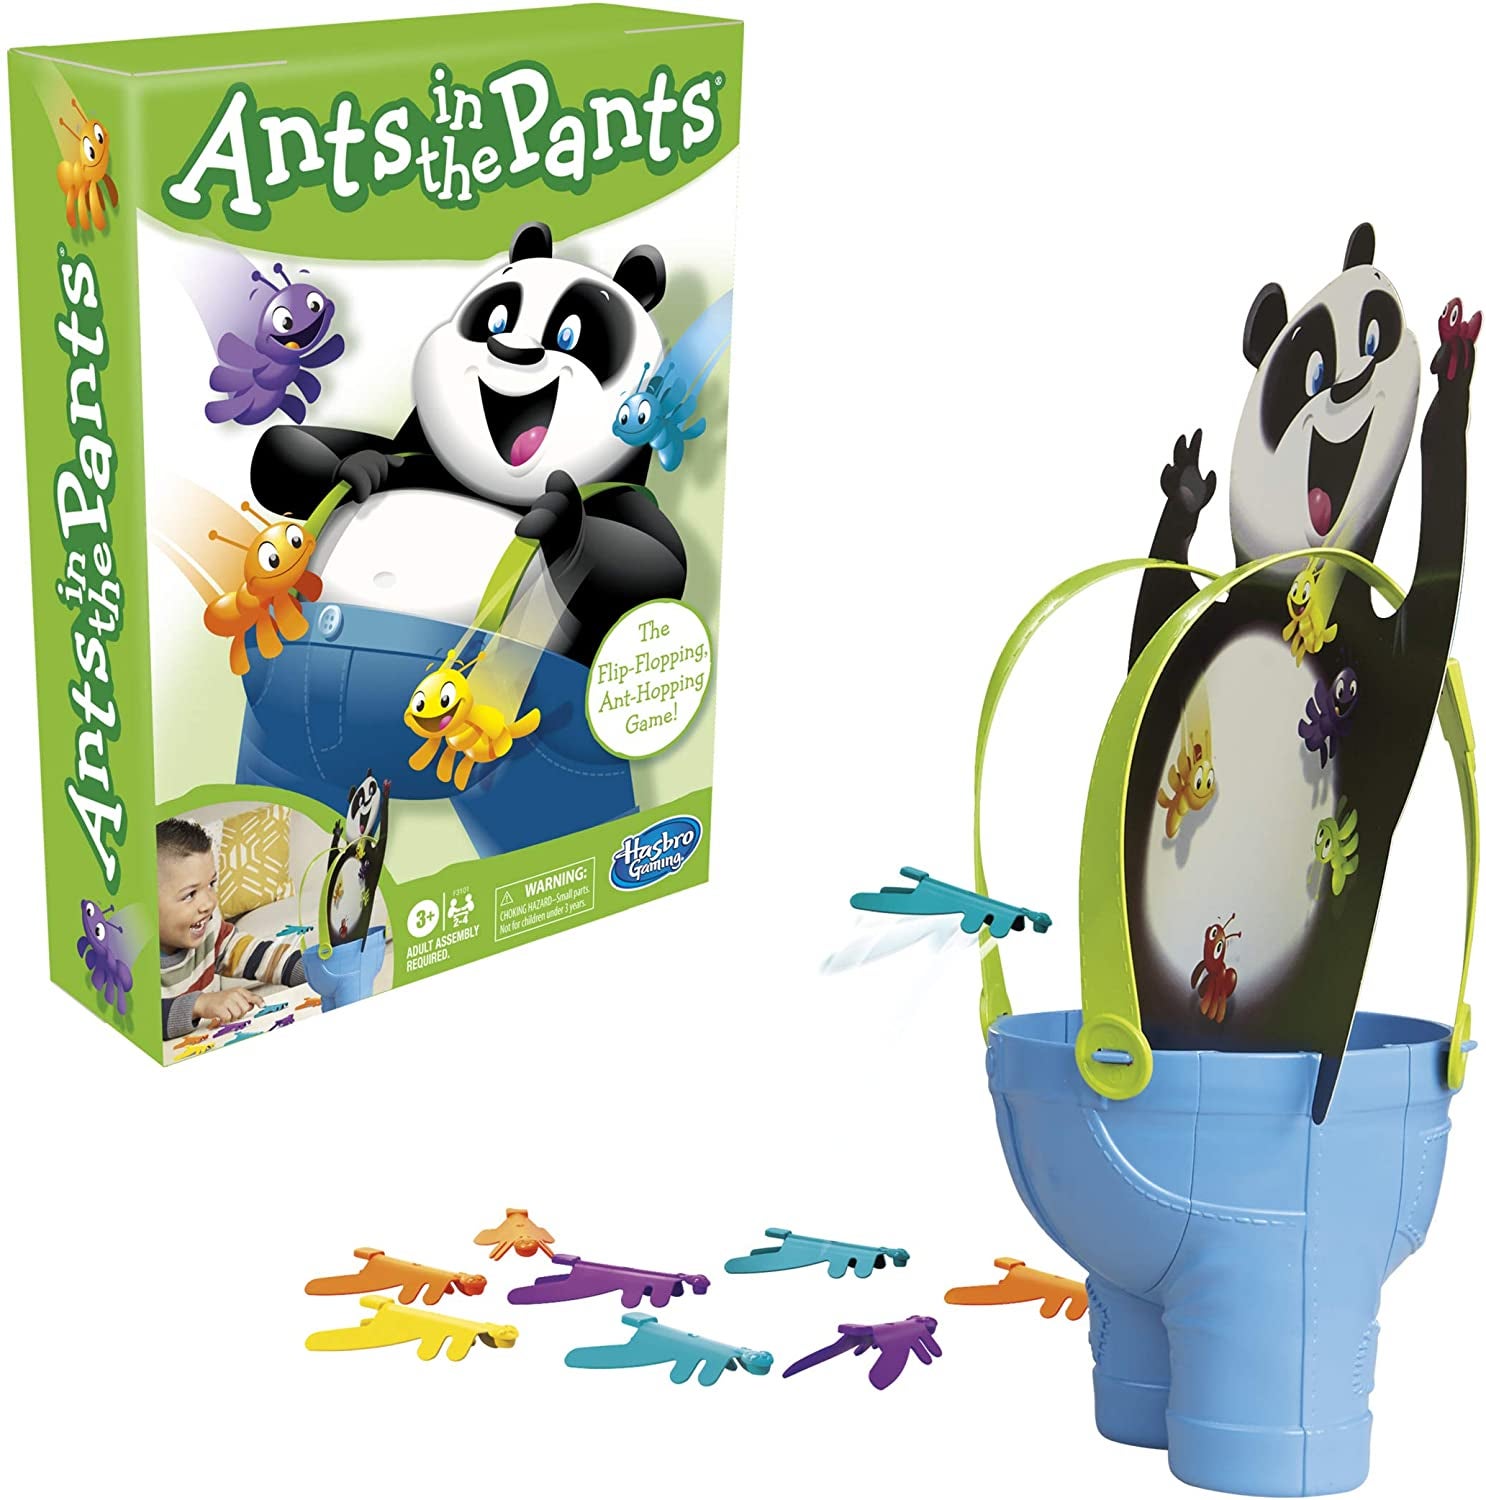 Game box with illustration of panda and cartoon bugs next to plastic panda-shaped game board and game pieces